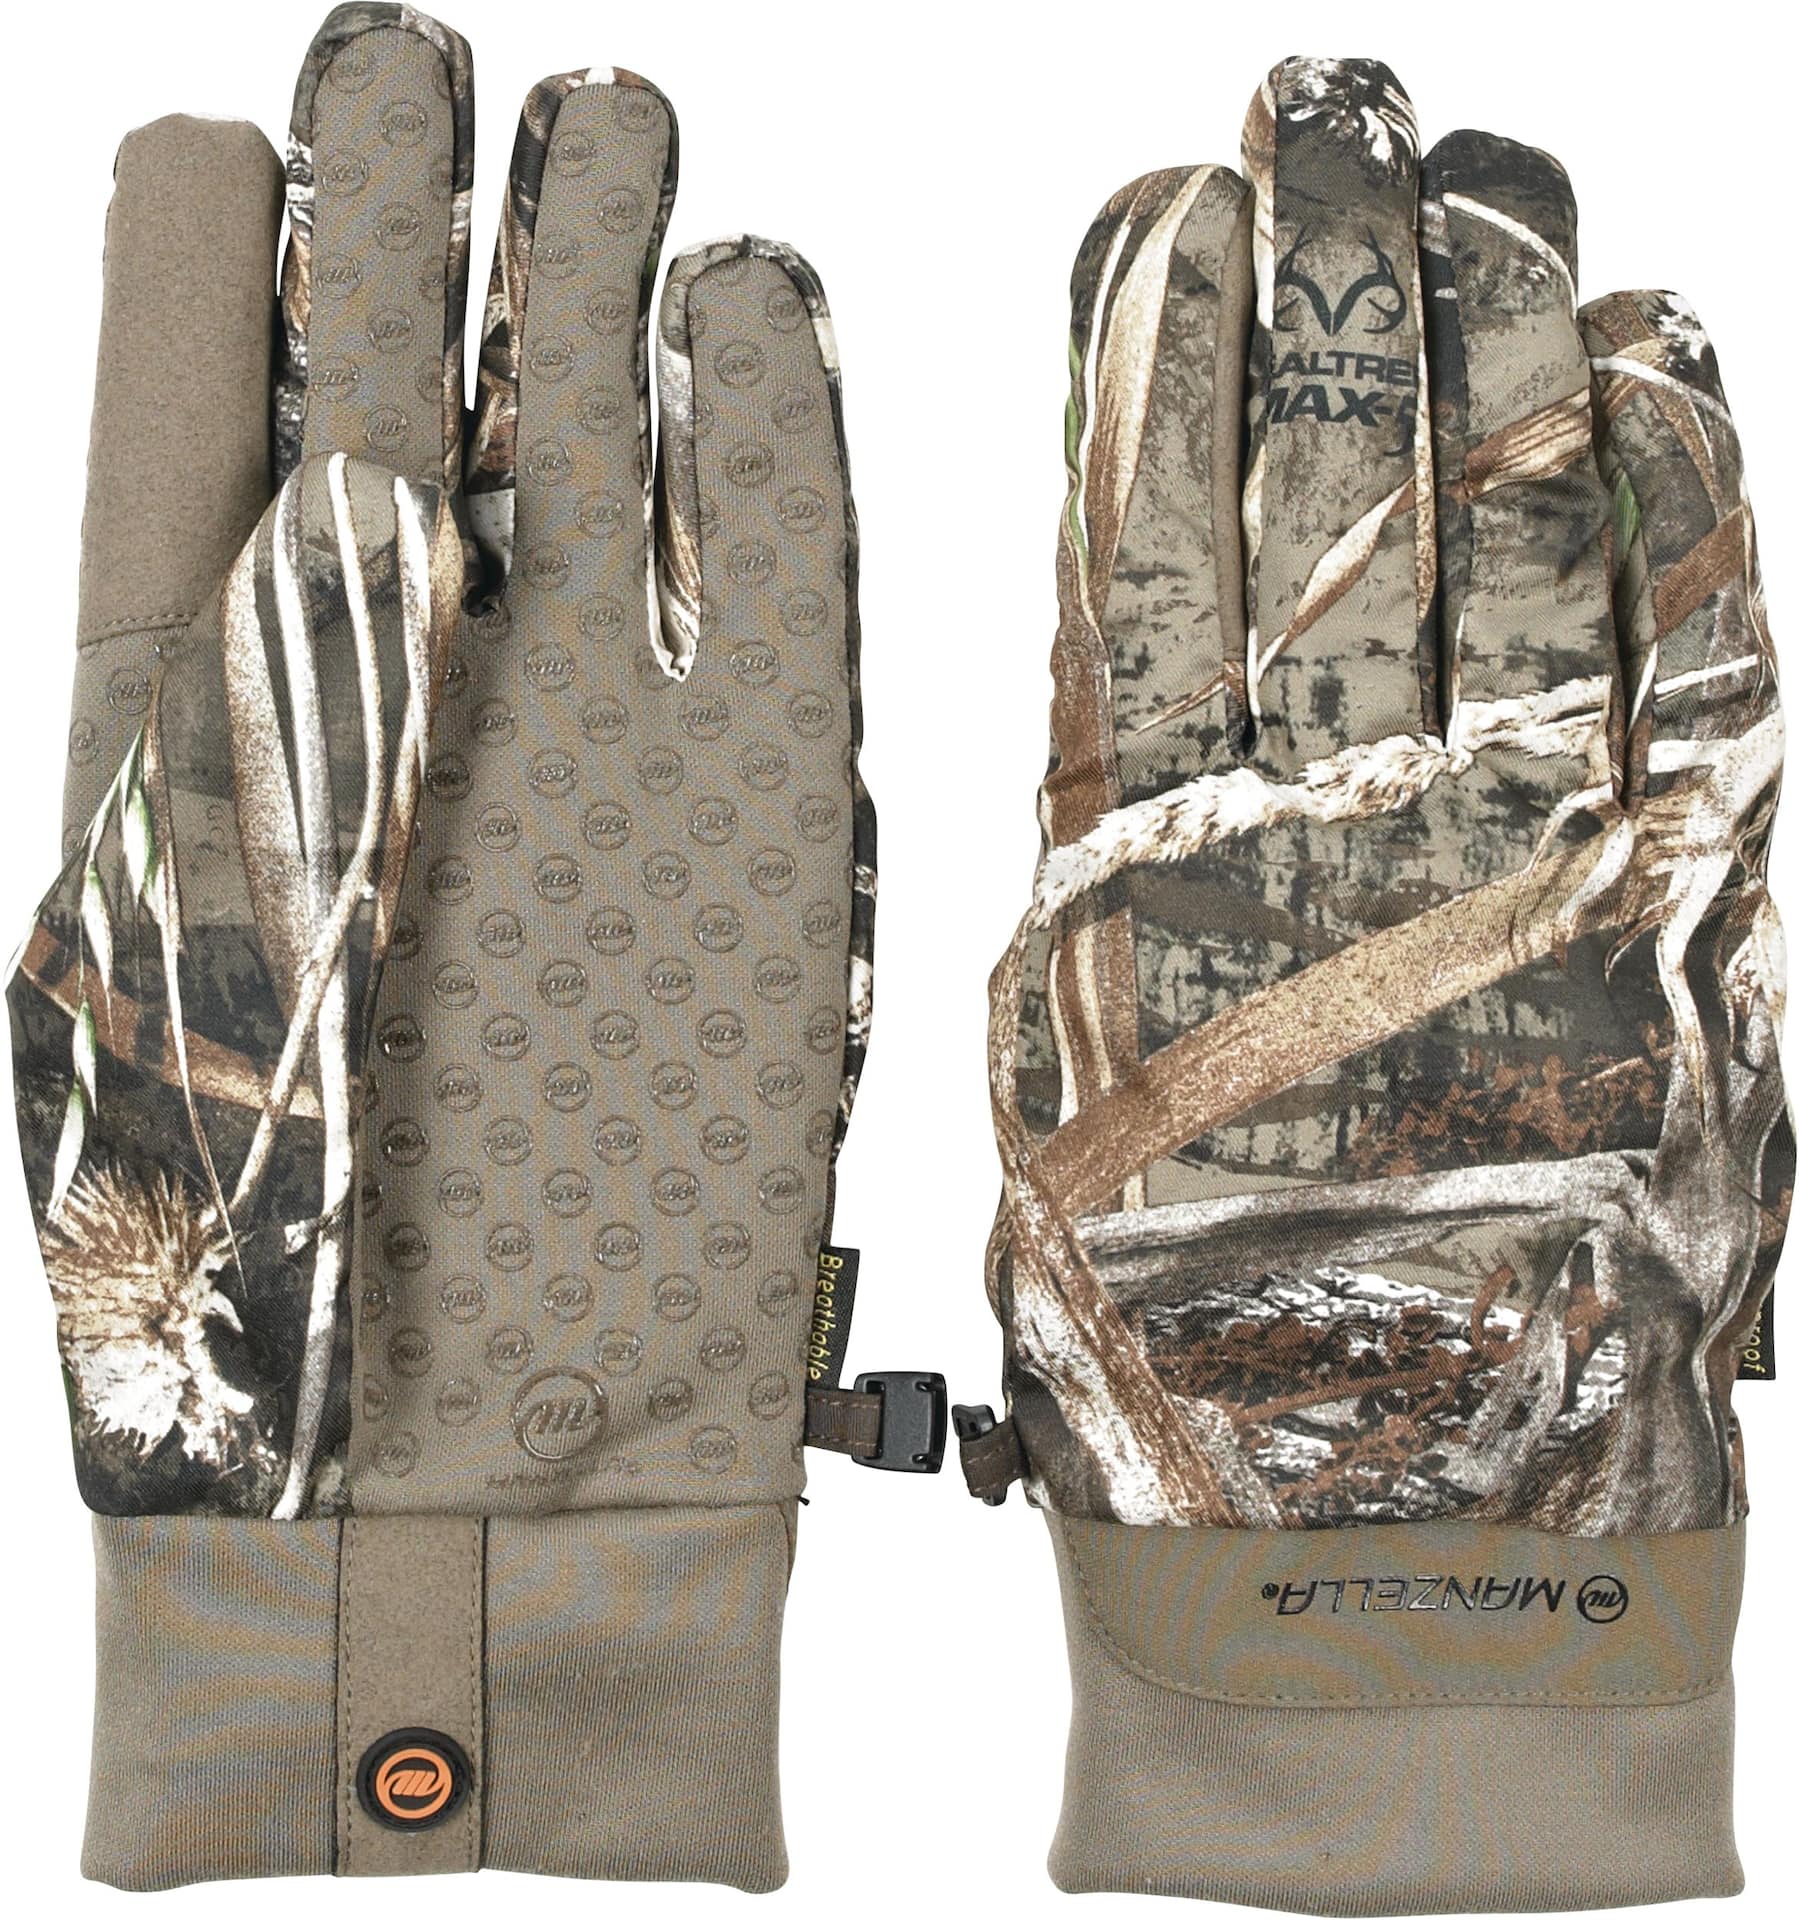 Manzella Waterfowl Shooter WaterProof Hunting Gloves, Lined for